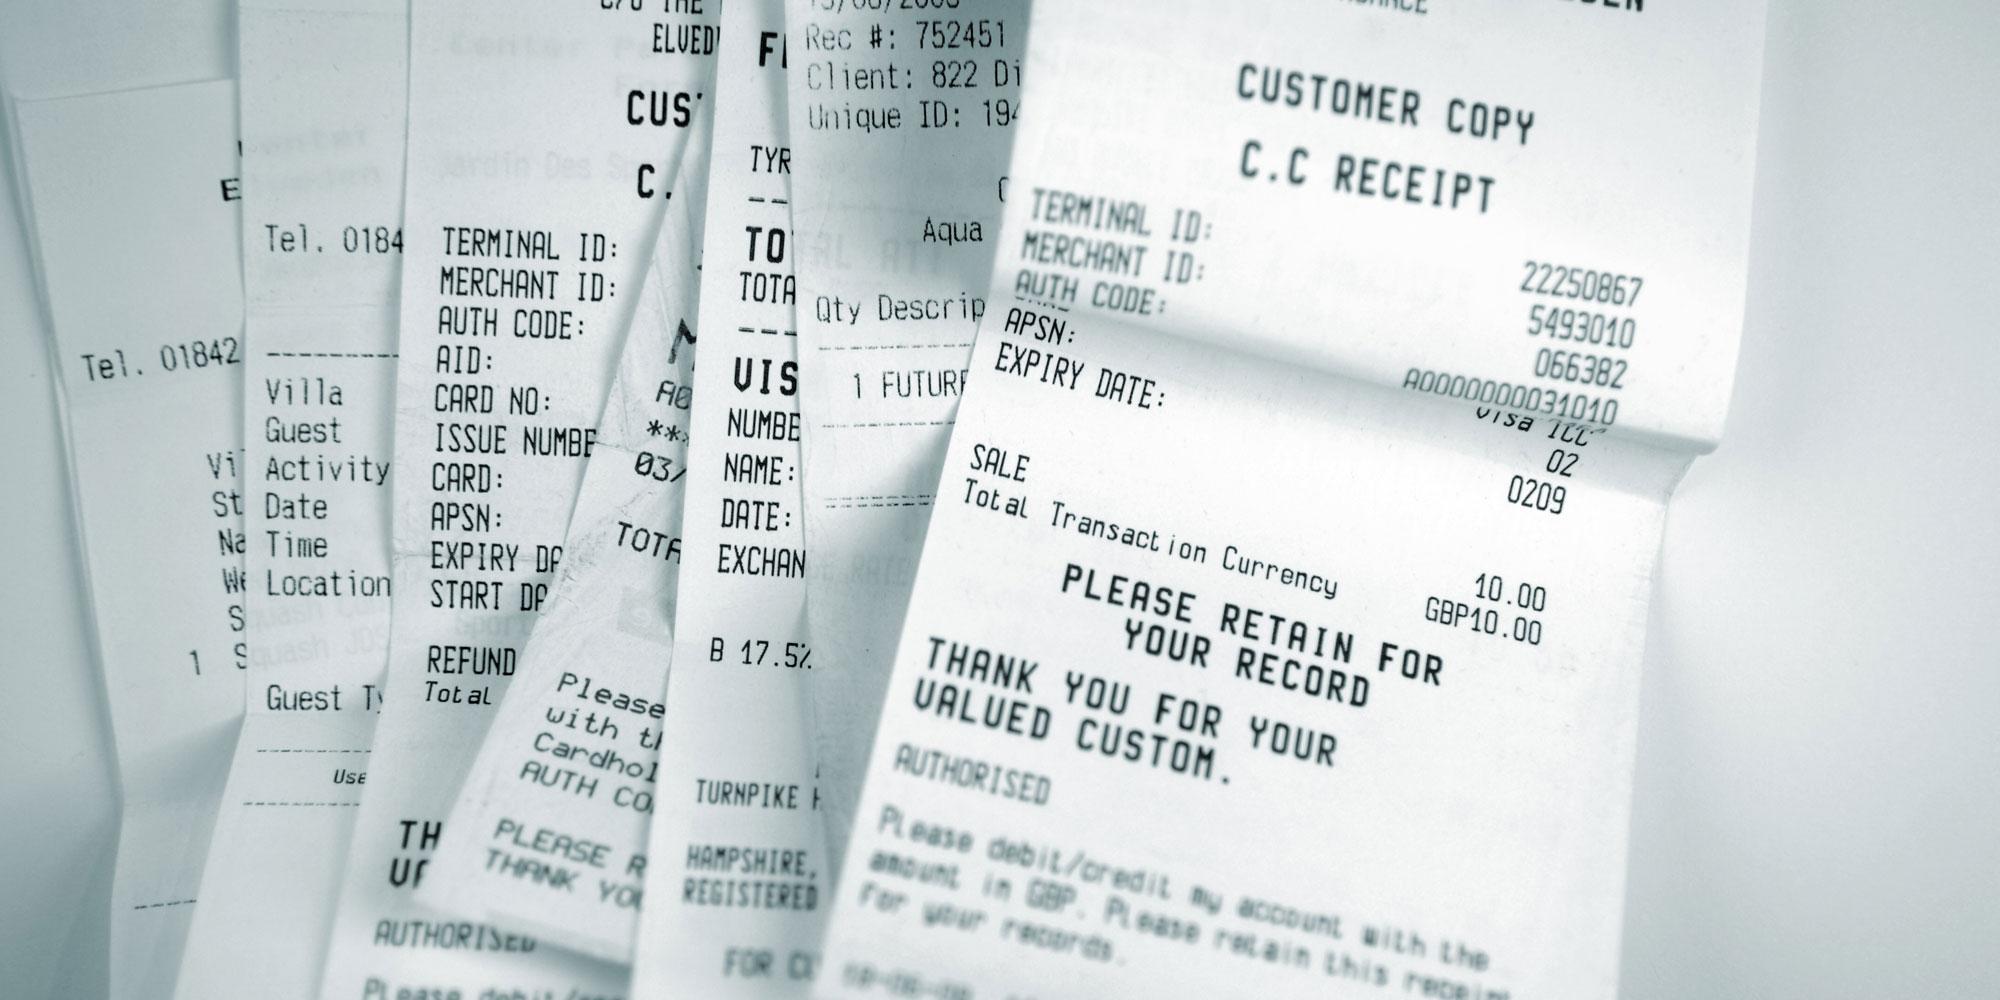 Most receipts have been found to contain BPA, a toxic chemical